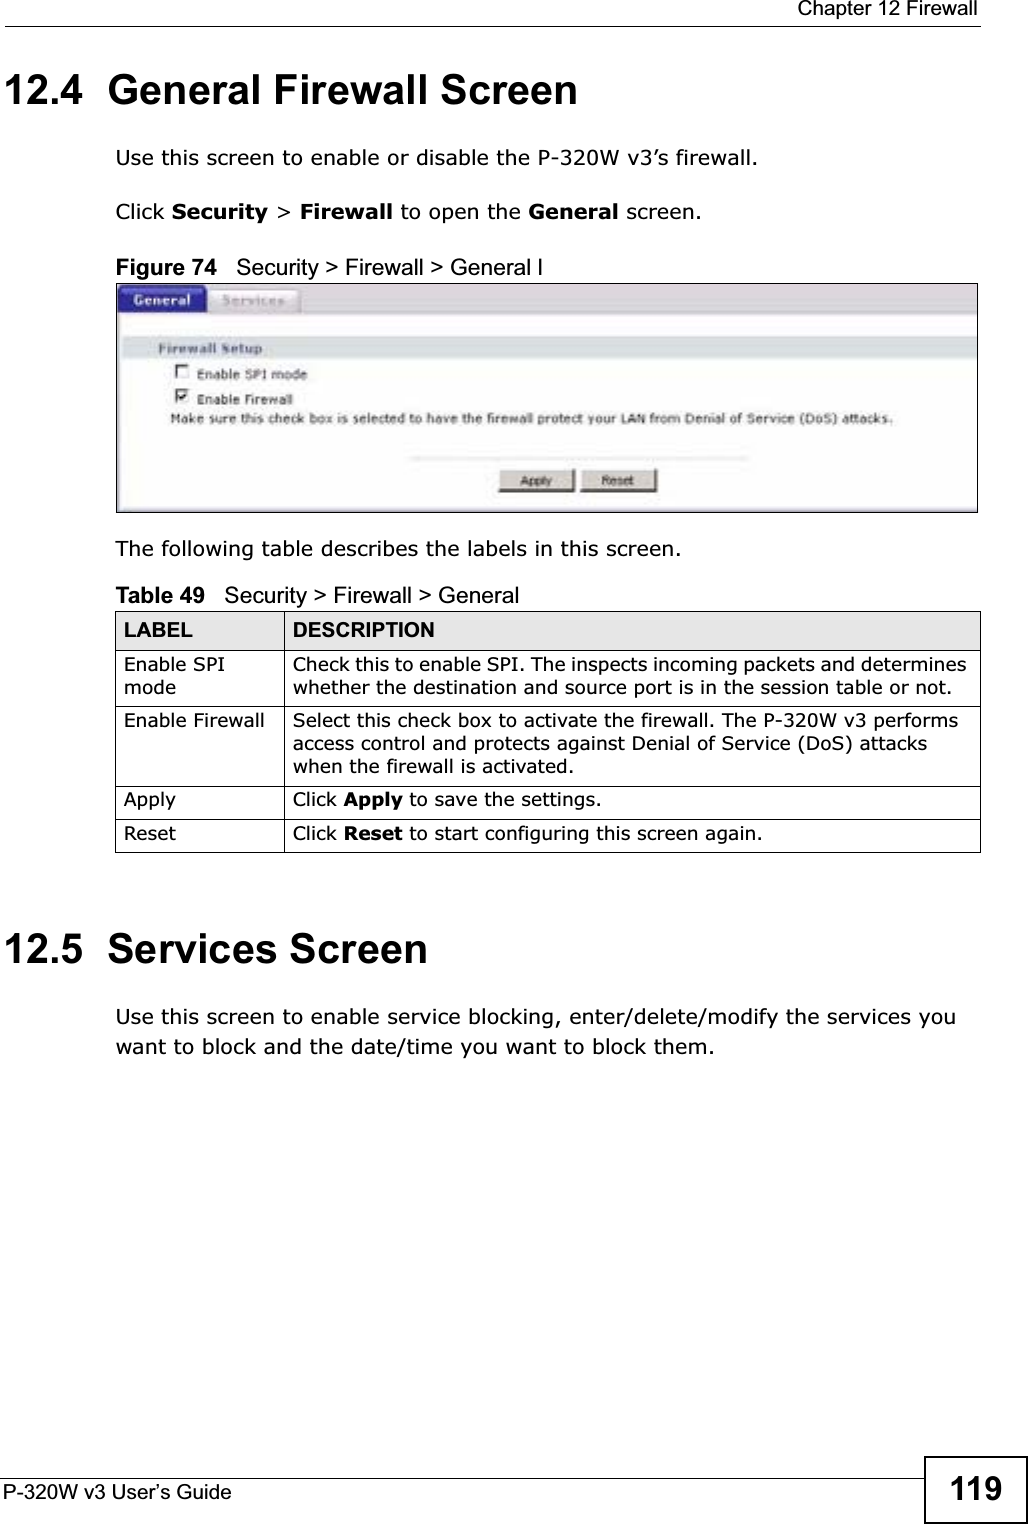  Chapter 12 FirewallP-320W v3 User’s Guide 11912.4  General Firewall ScreenUse this screen to enable or disable the P-320W v3’s firewall. Click Security &gt; Firewall to open the General screen.Figure 74   Security &gt; Firewall &gt; General lThe following table describes the labels in this screen.12.5  Services ScreenUse this screen to enable service blocking, enter/delete/modify the services you want to block and the date/time you want to block them.Table 49   Security &gt; Firewall &gt; General LABEL DESCRIPTIONEnable SPI modeCheck this to enable SPI. The inspects incoming packets and determines whether the destination and source port is in the session table or not.Enable Firewall Select this check box to activate the firewall. The P-320W v3 performs access control and protects against Denial of Service (DoS) attacks when the firewall is activated.Apply Click Apply to save the settings. Reset Click Reset to start configuring this screen again. 